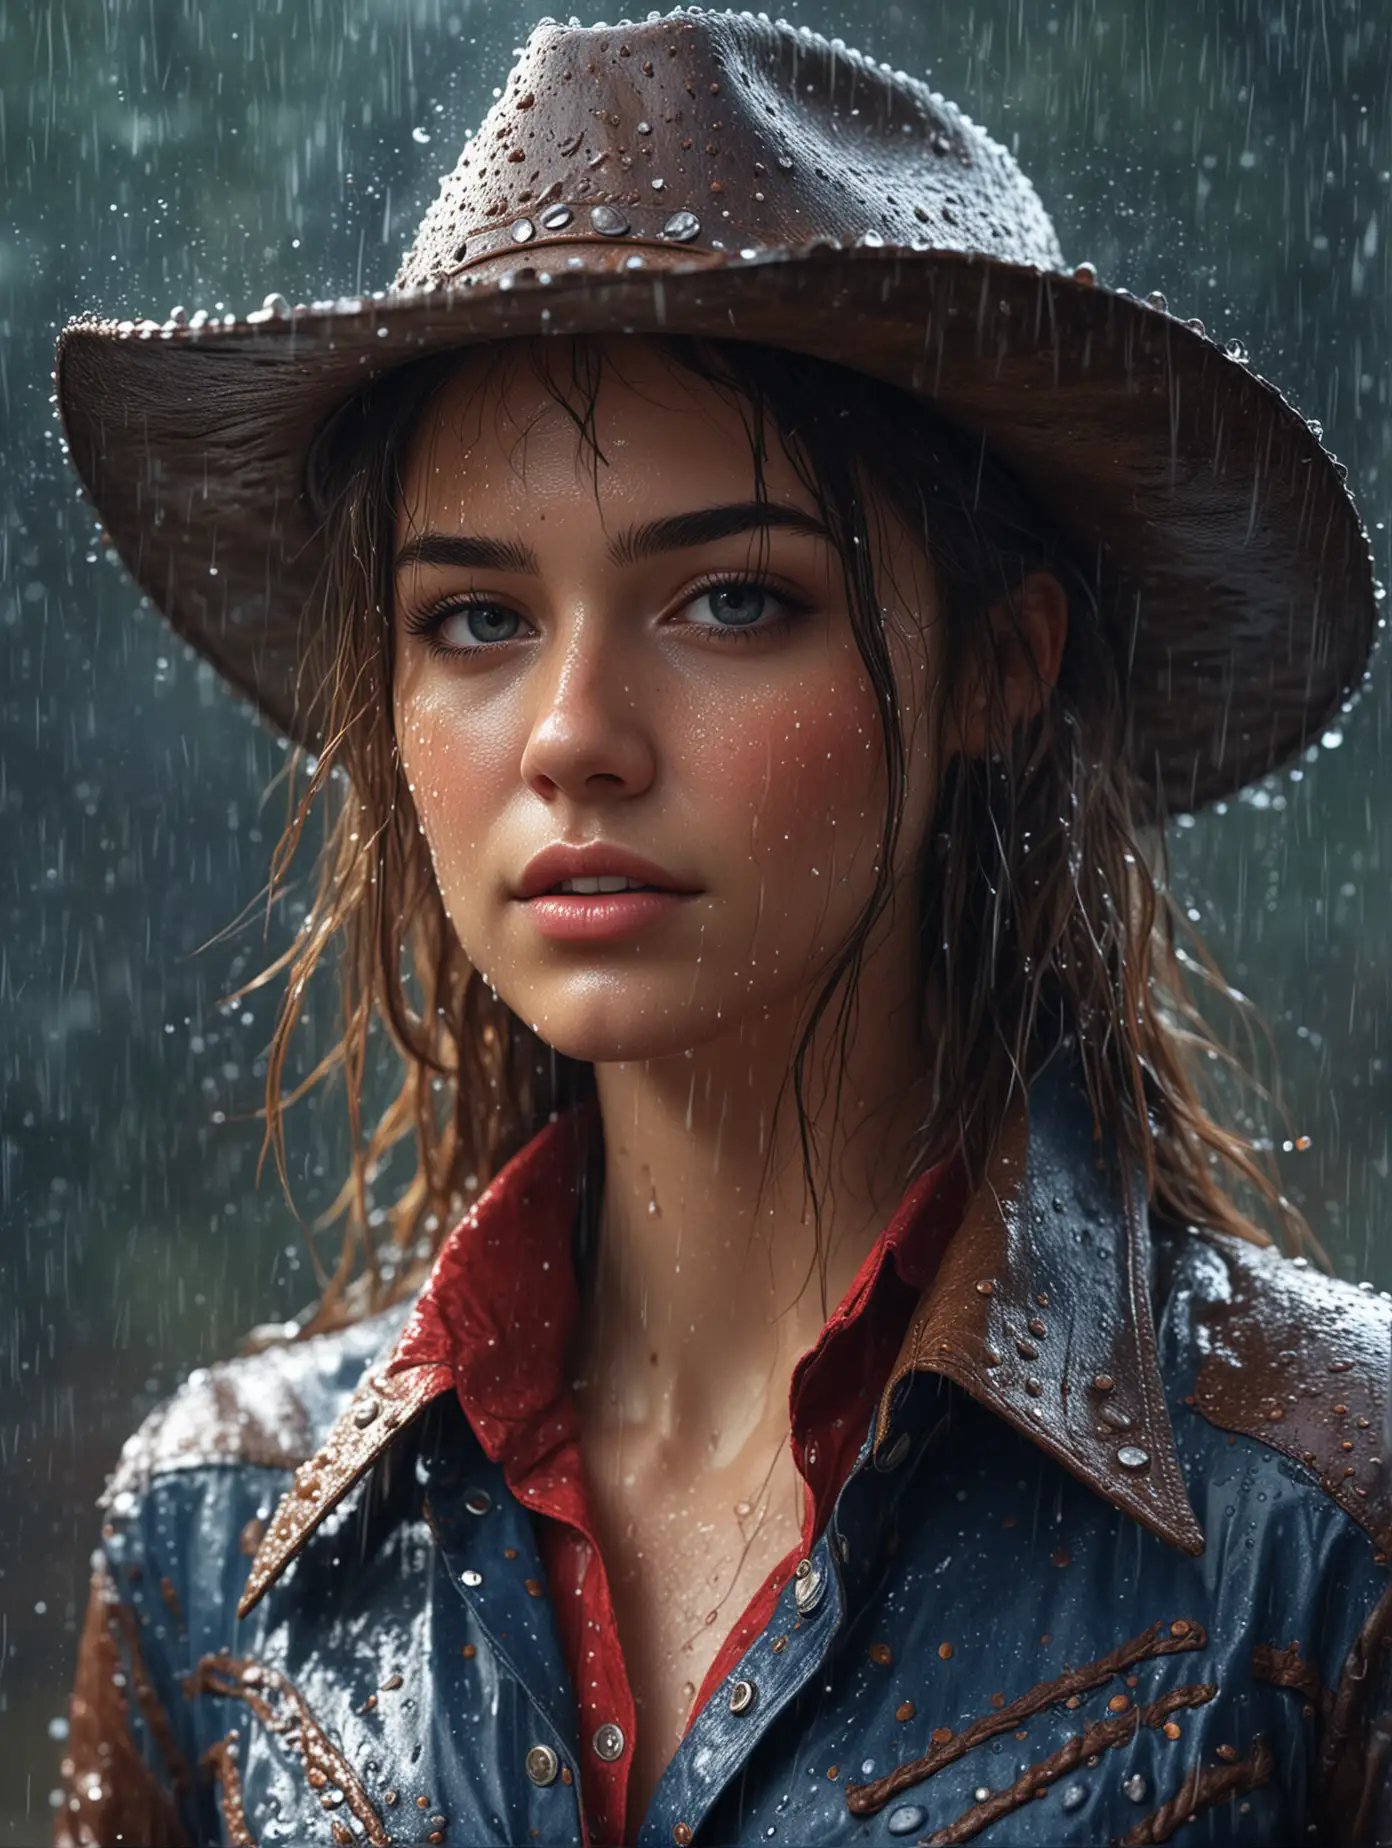 Create a realistic image focused close up view of a beautiful girl in a cowboy's outfit, under the pouring rain, Realistic image, rain effects, water effect, colorful organic shape, hyperdetailed, masterpiece art